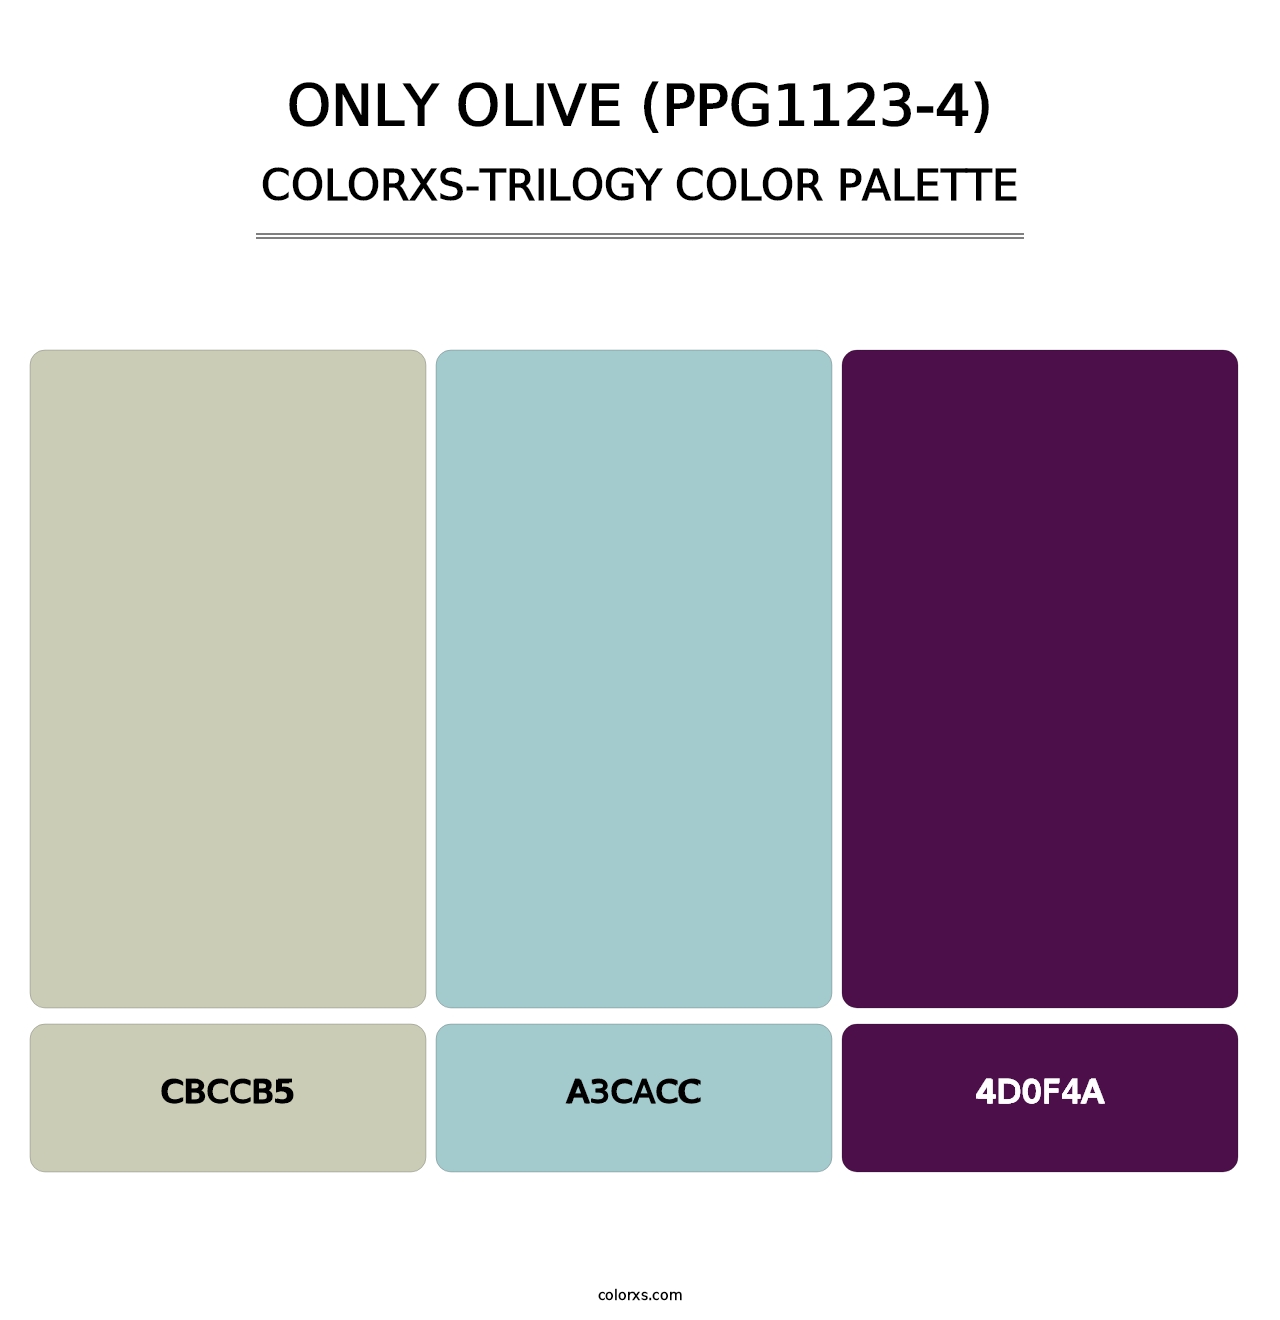 Only Olive (PPG1123-4) - Colorxs Trilogy Palette